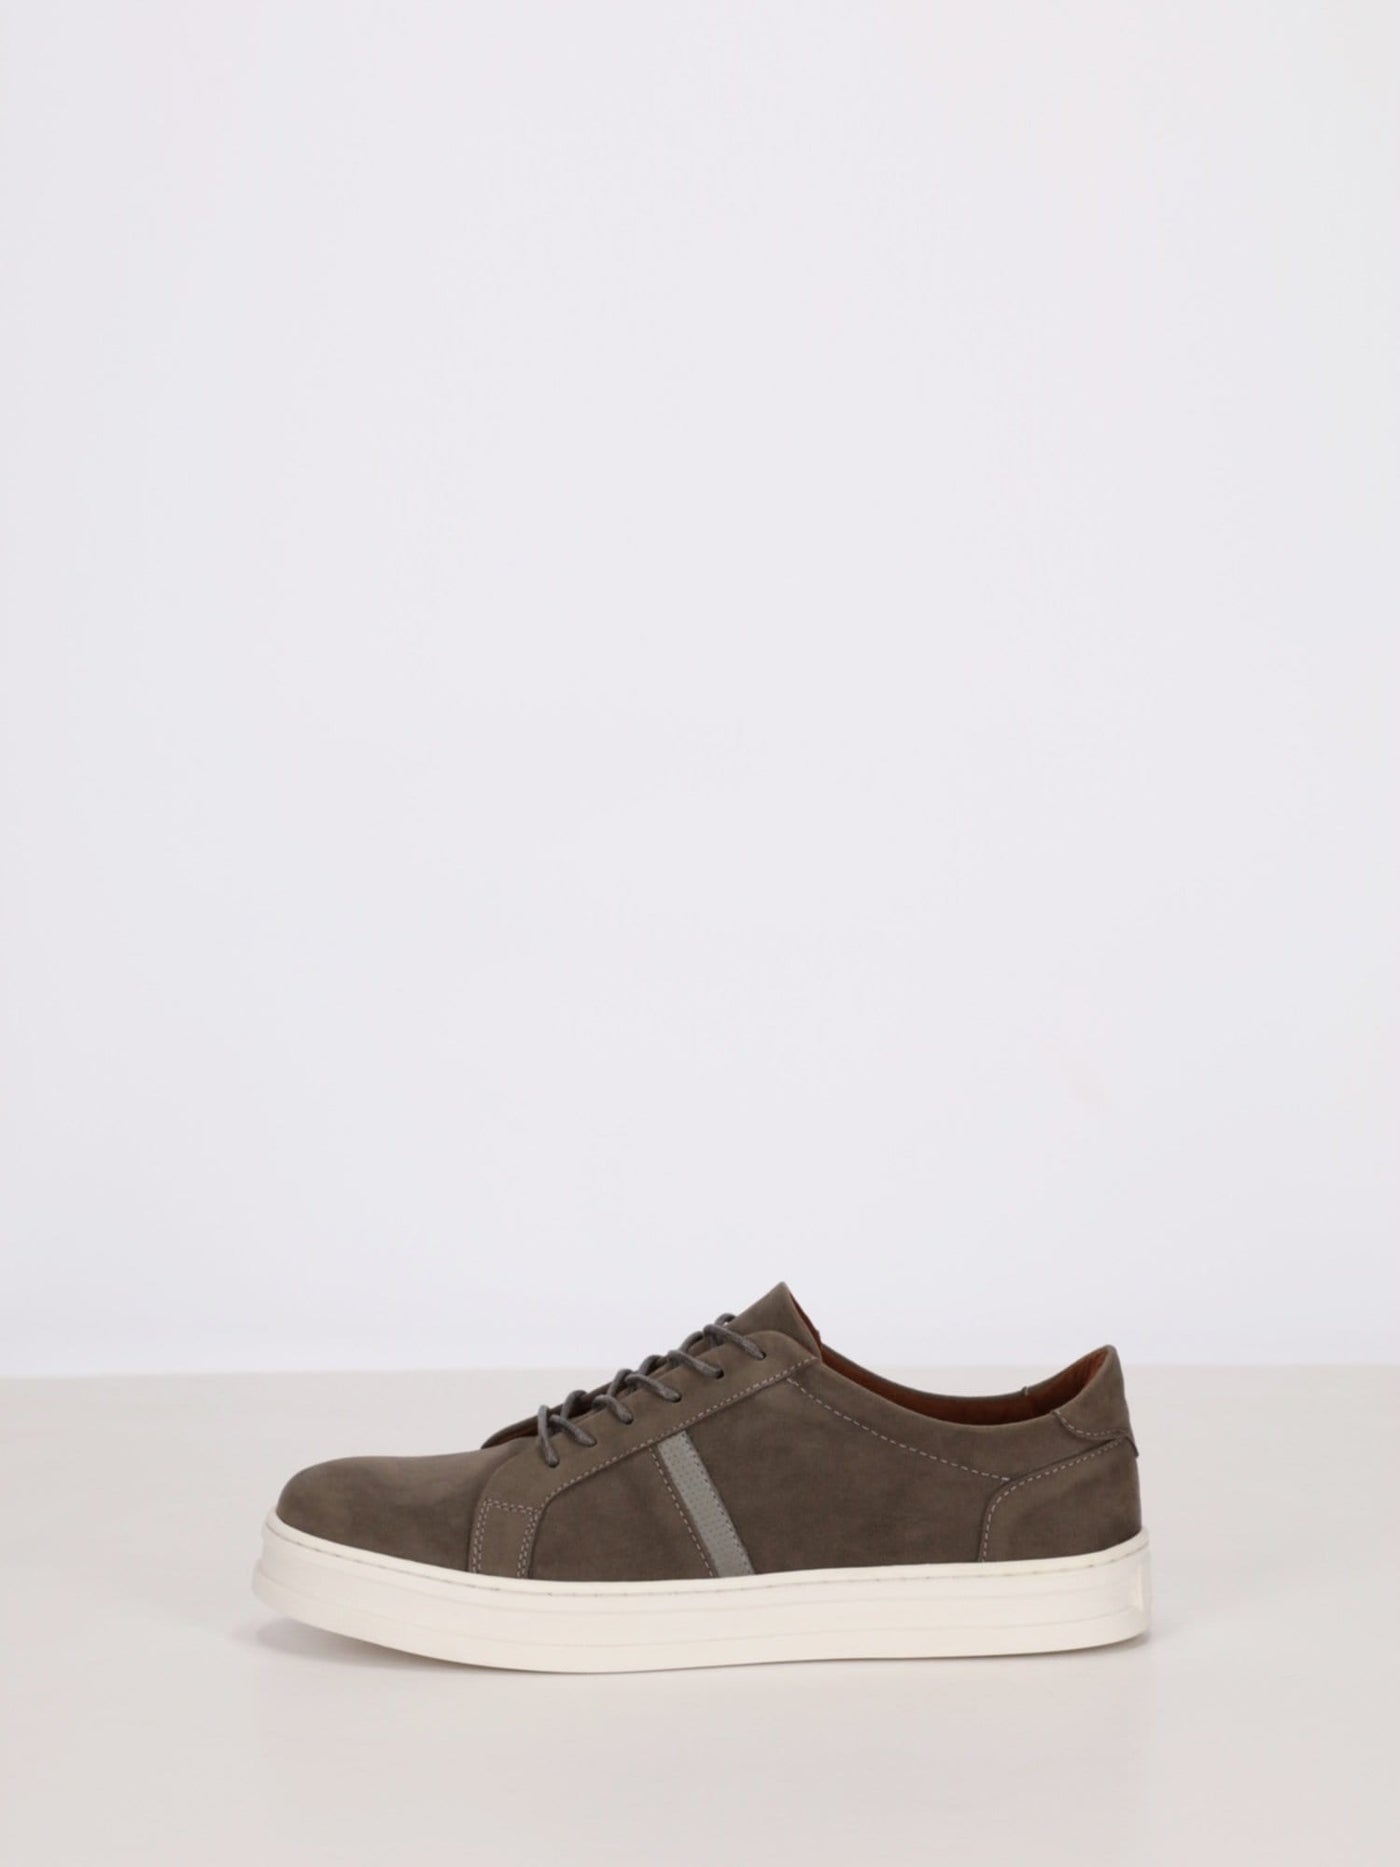 OR Sneakers Side Stripe Casual Shoes